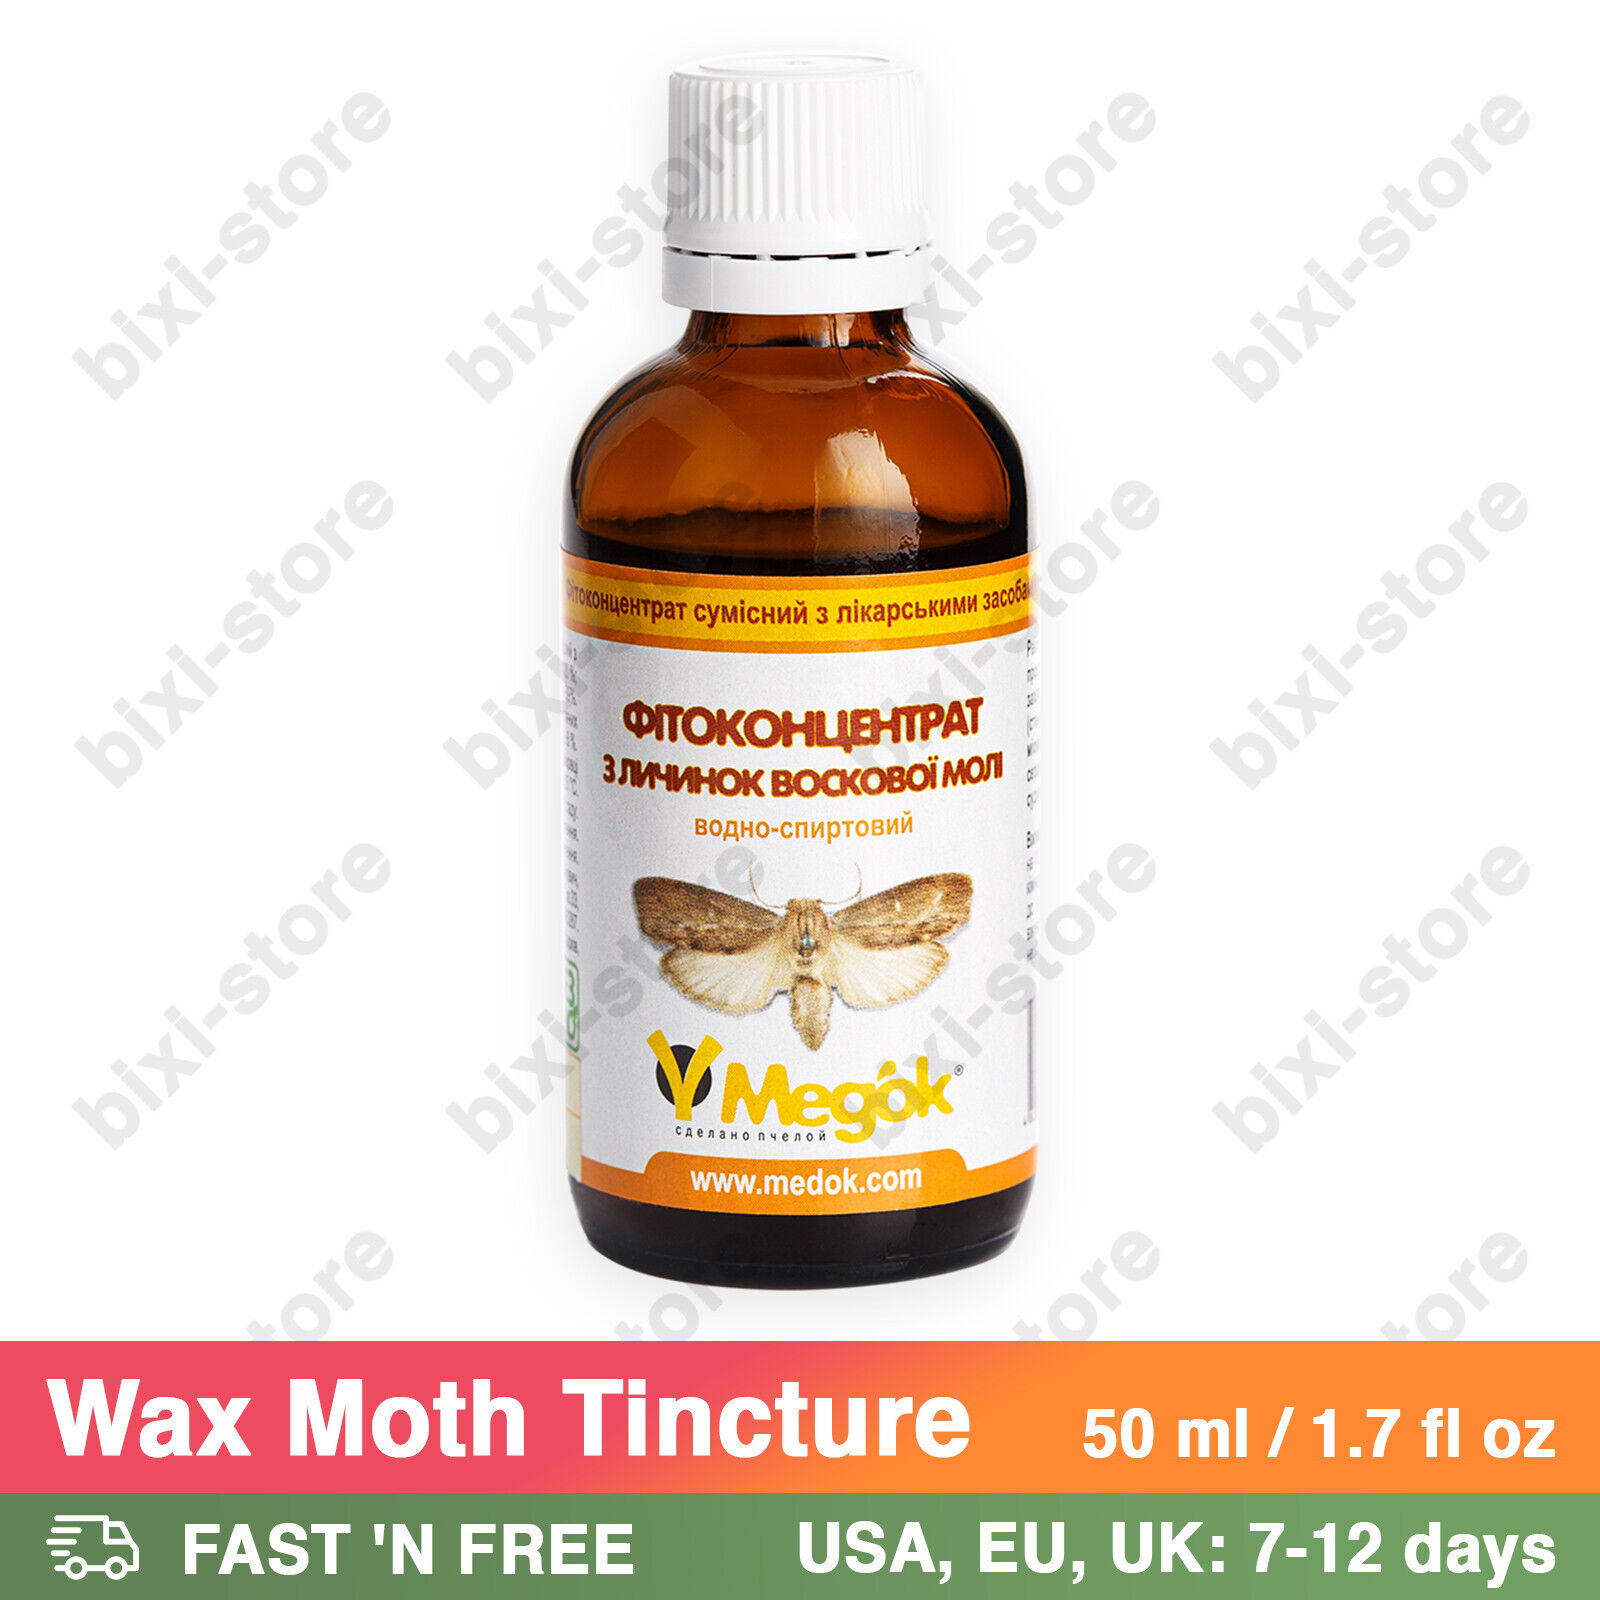 Wax Moth Tincture 100% Organic Natural Beekeeping Product From Ukraine 50 ml